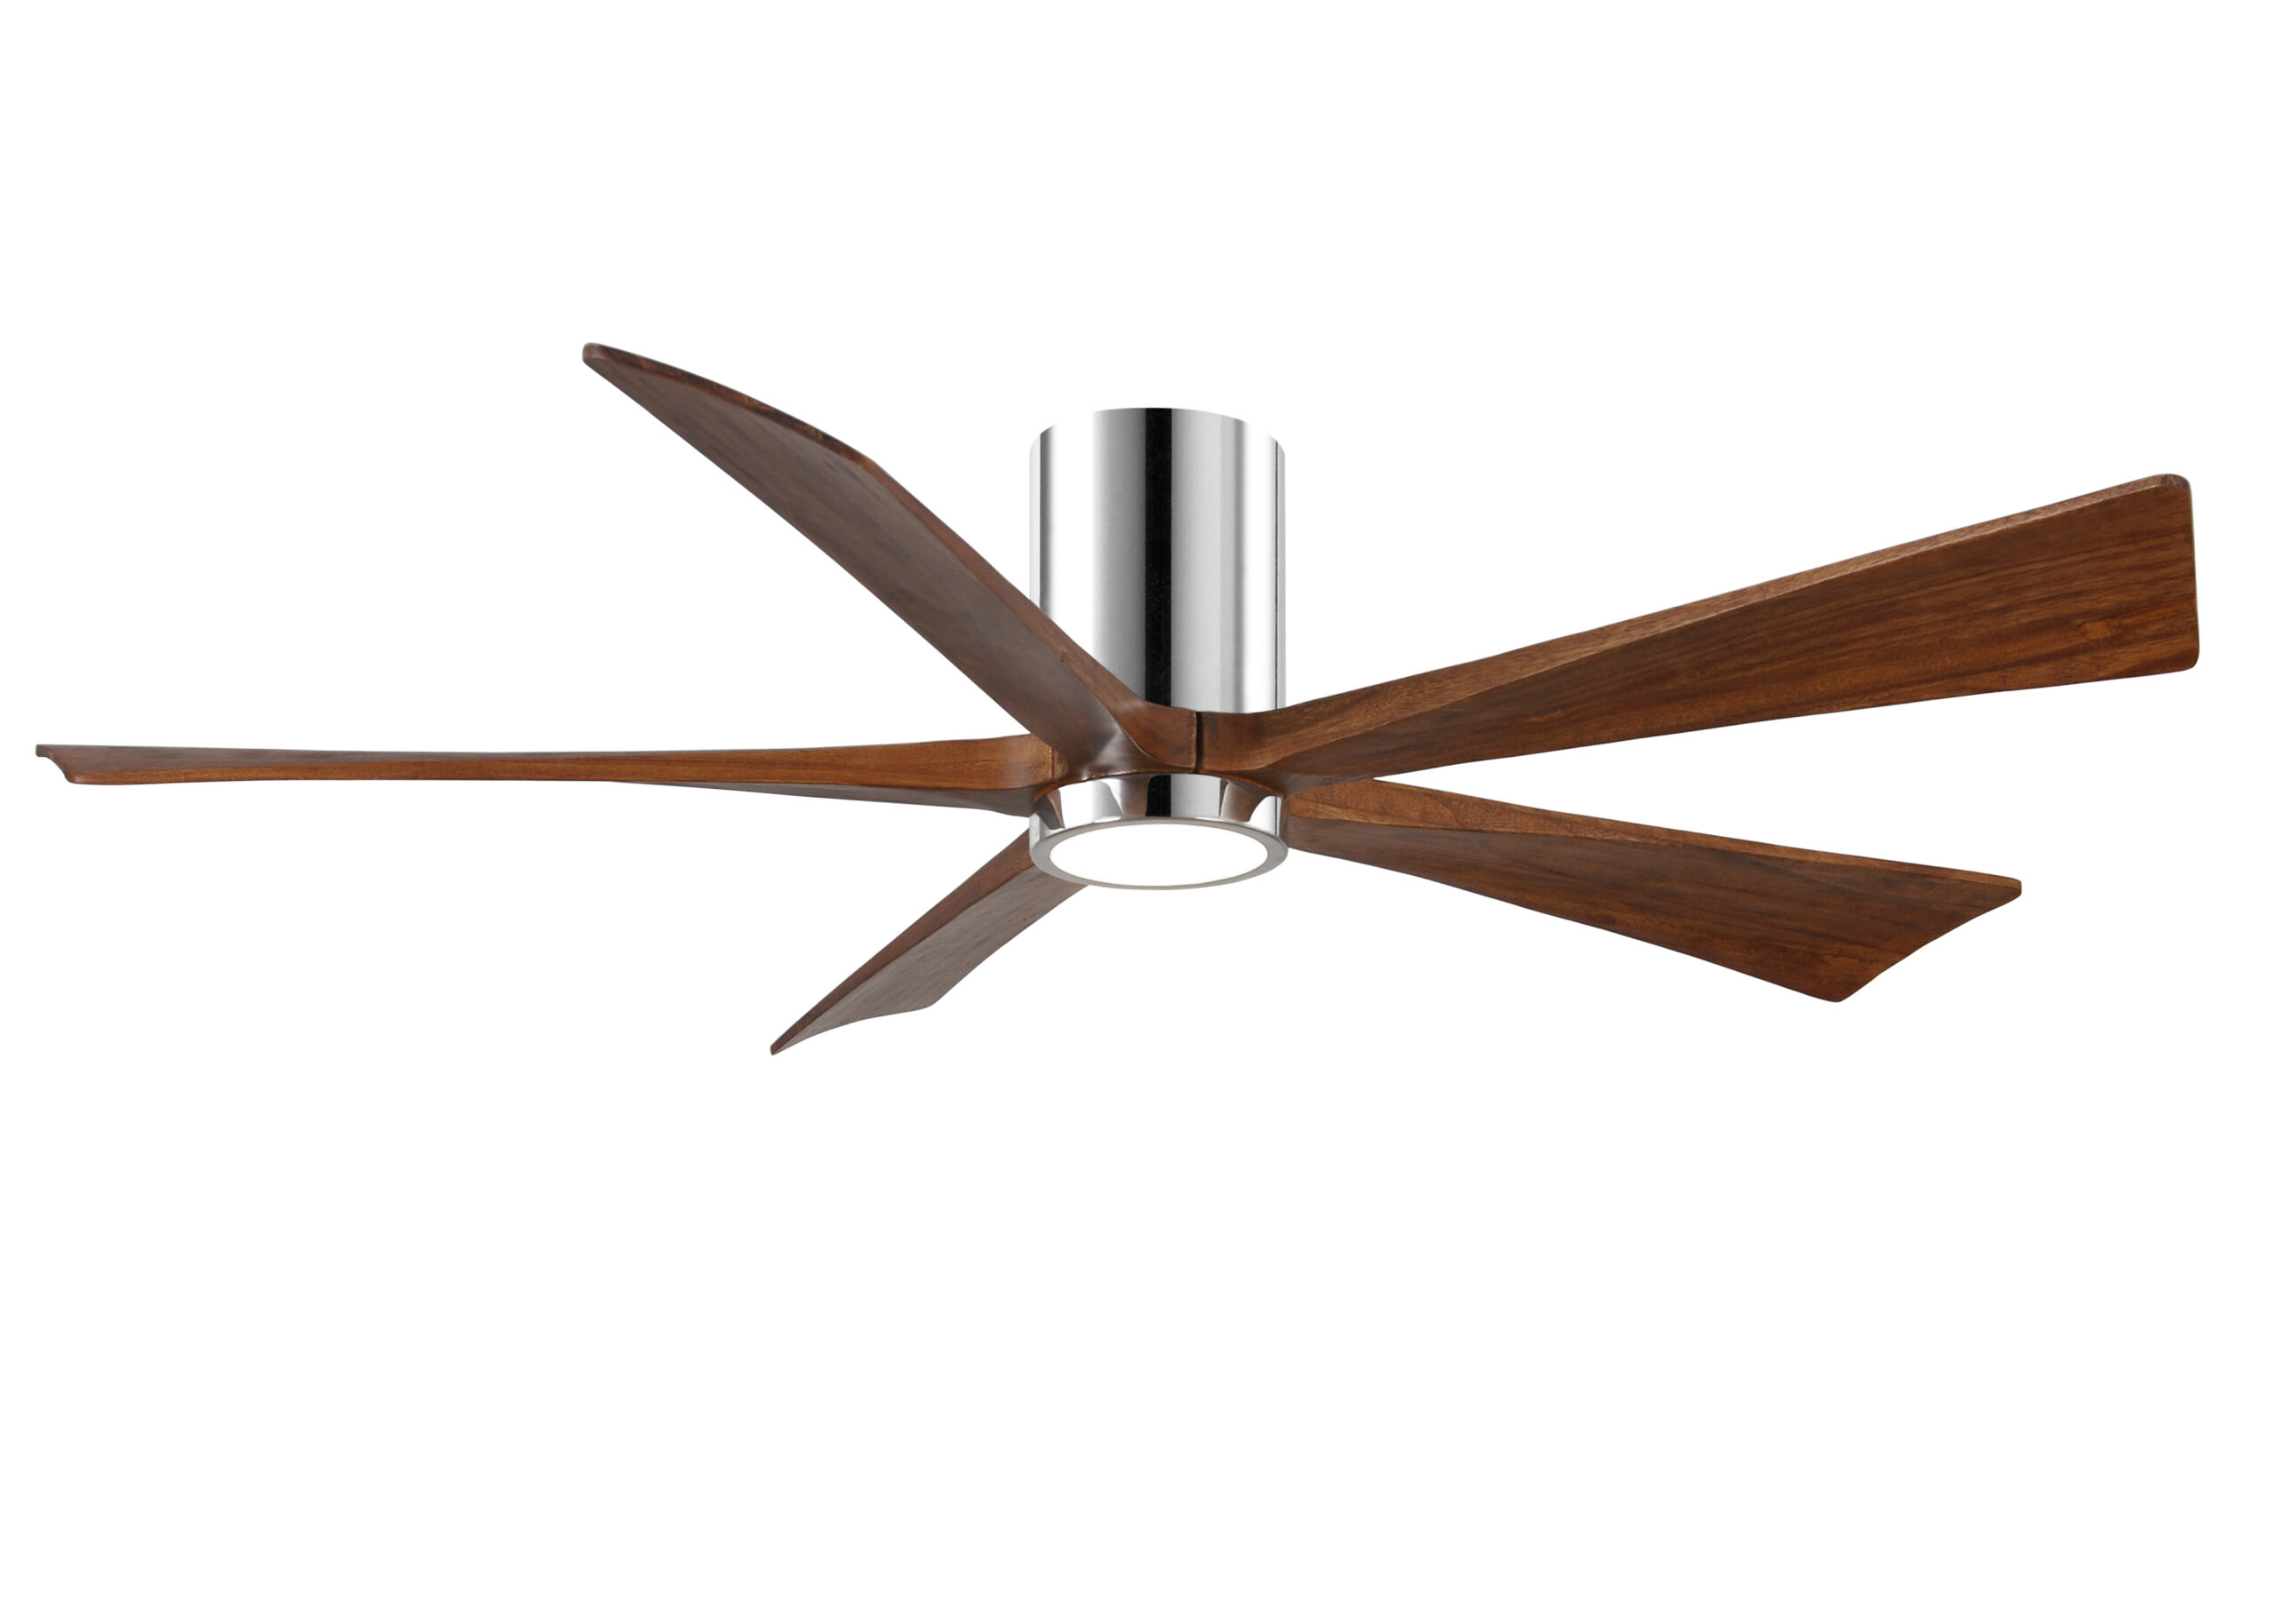 Irene-5HLK Ceiling Fan in Polished Chrome Finish with 60